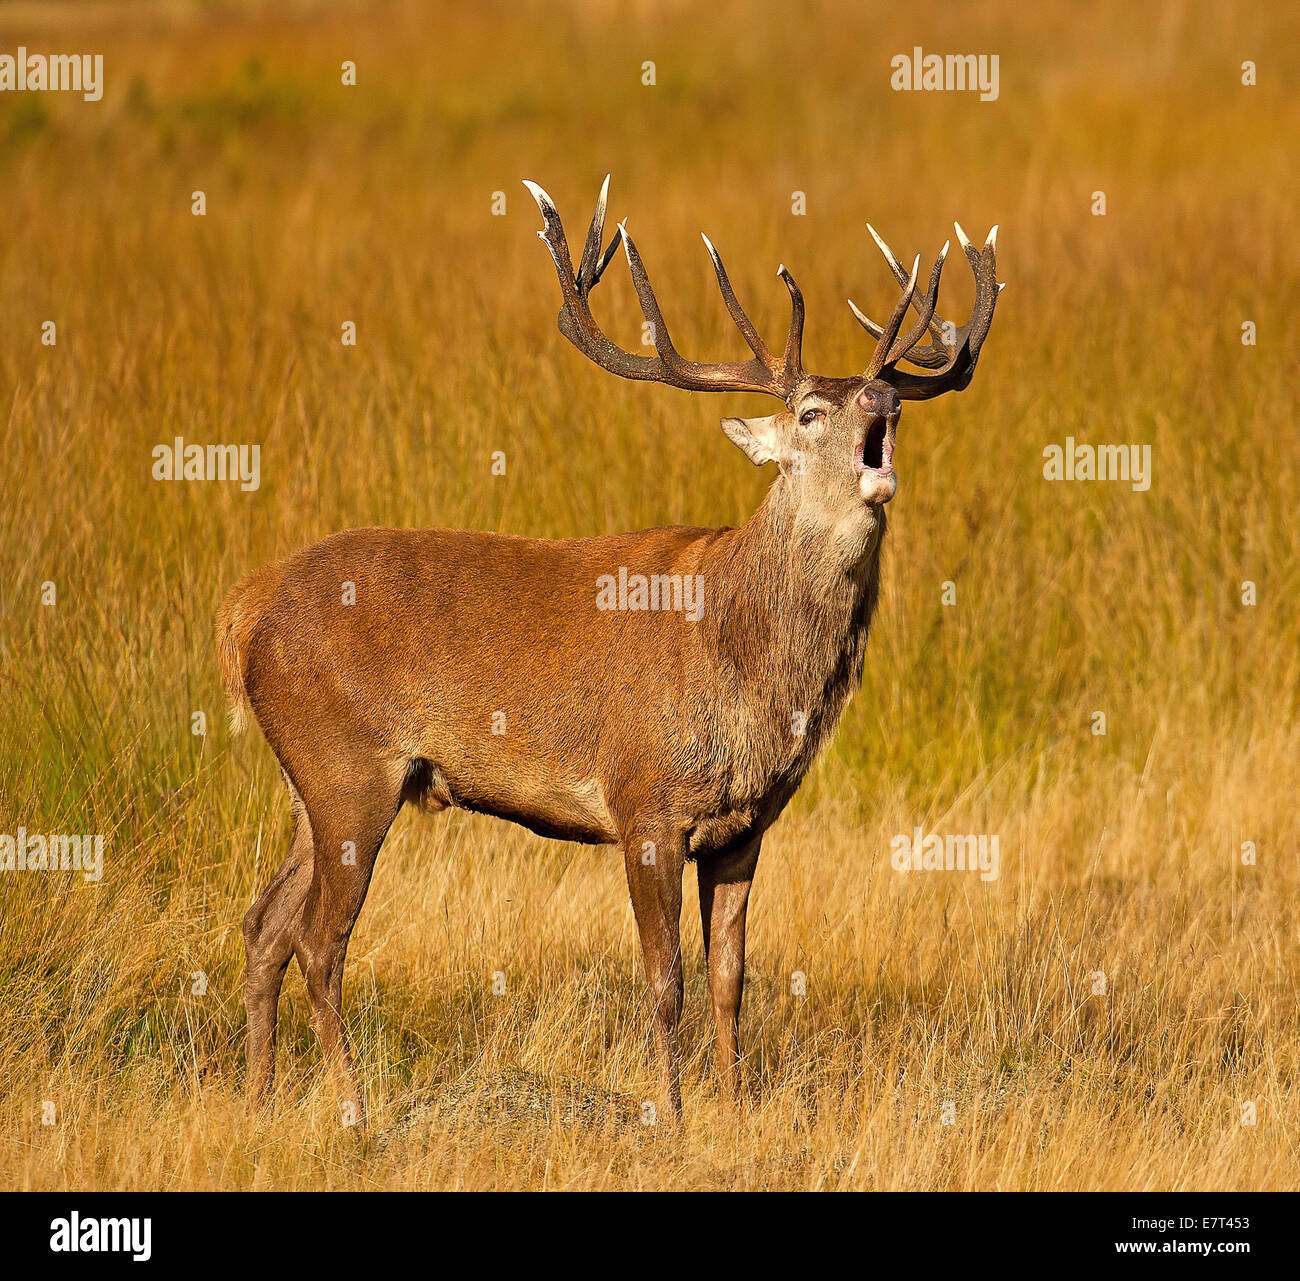 Red deer stag bellowing during rutting season Stock Photo